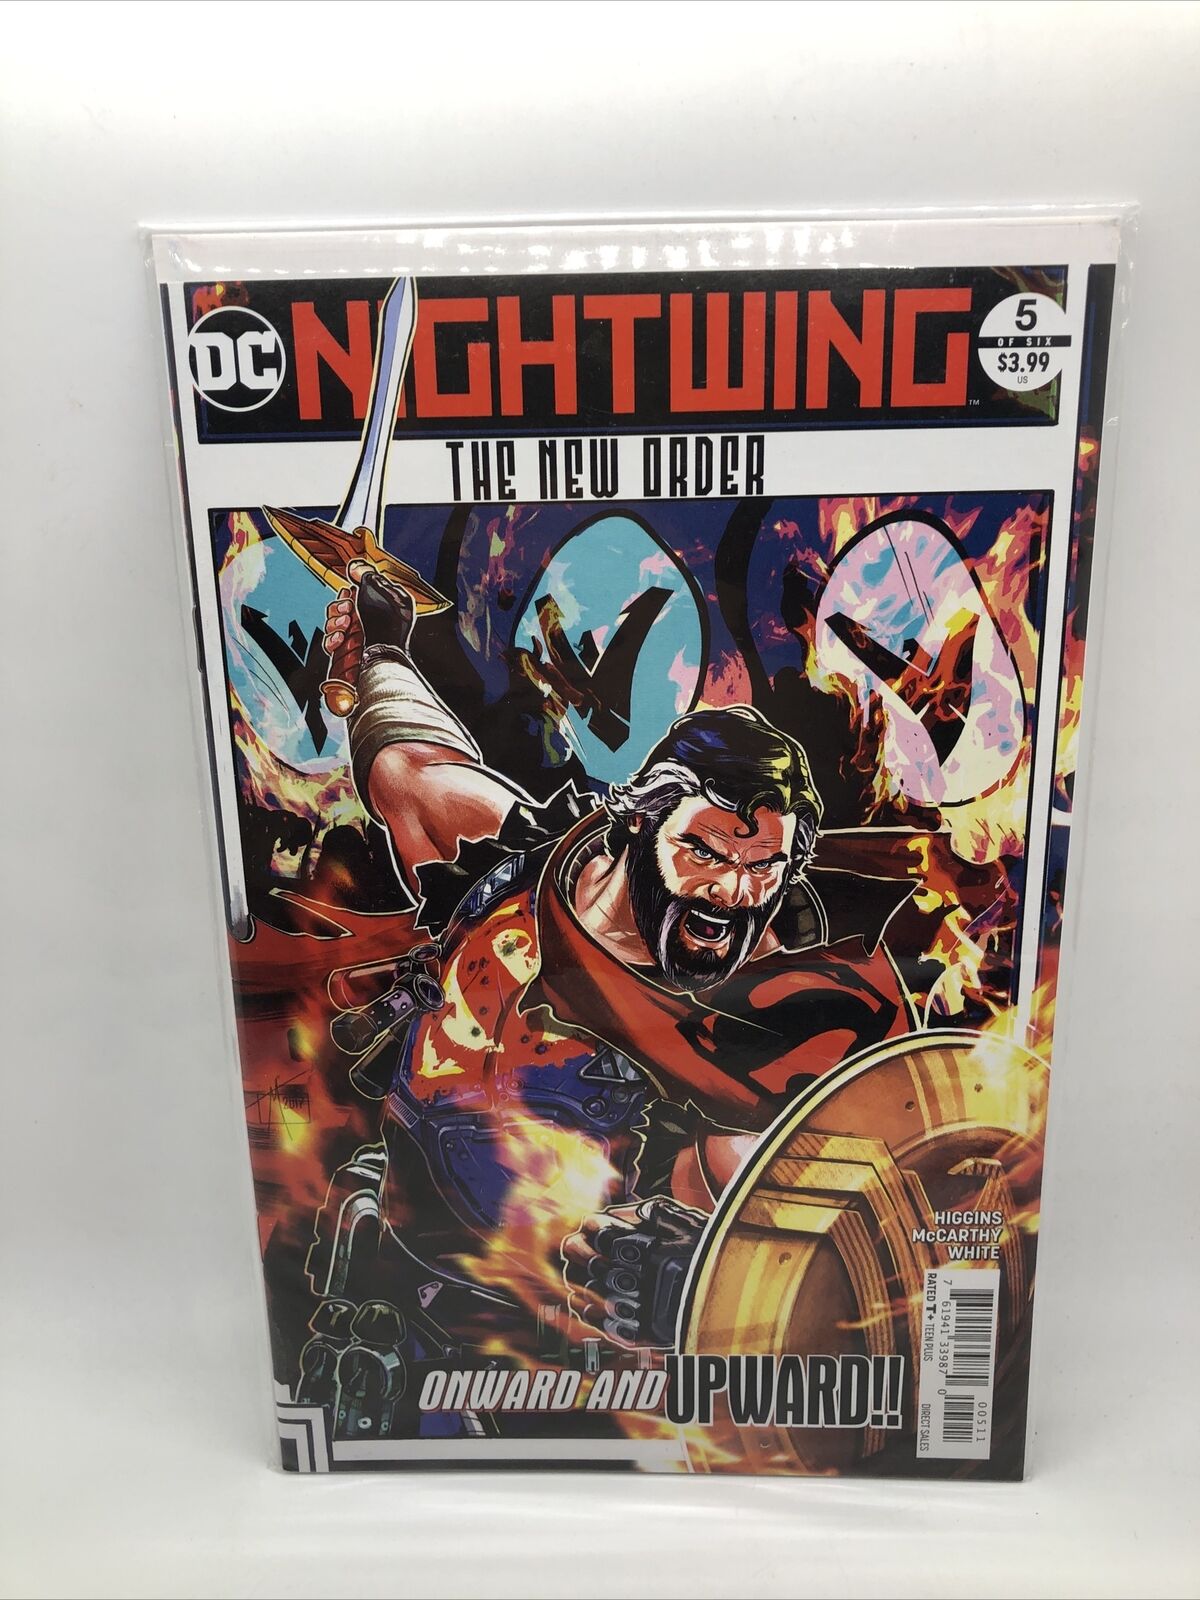 Nightwing #5 The New Order